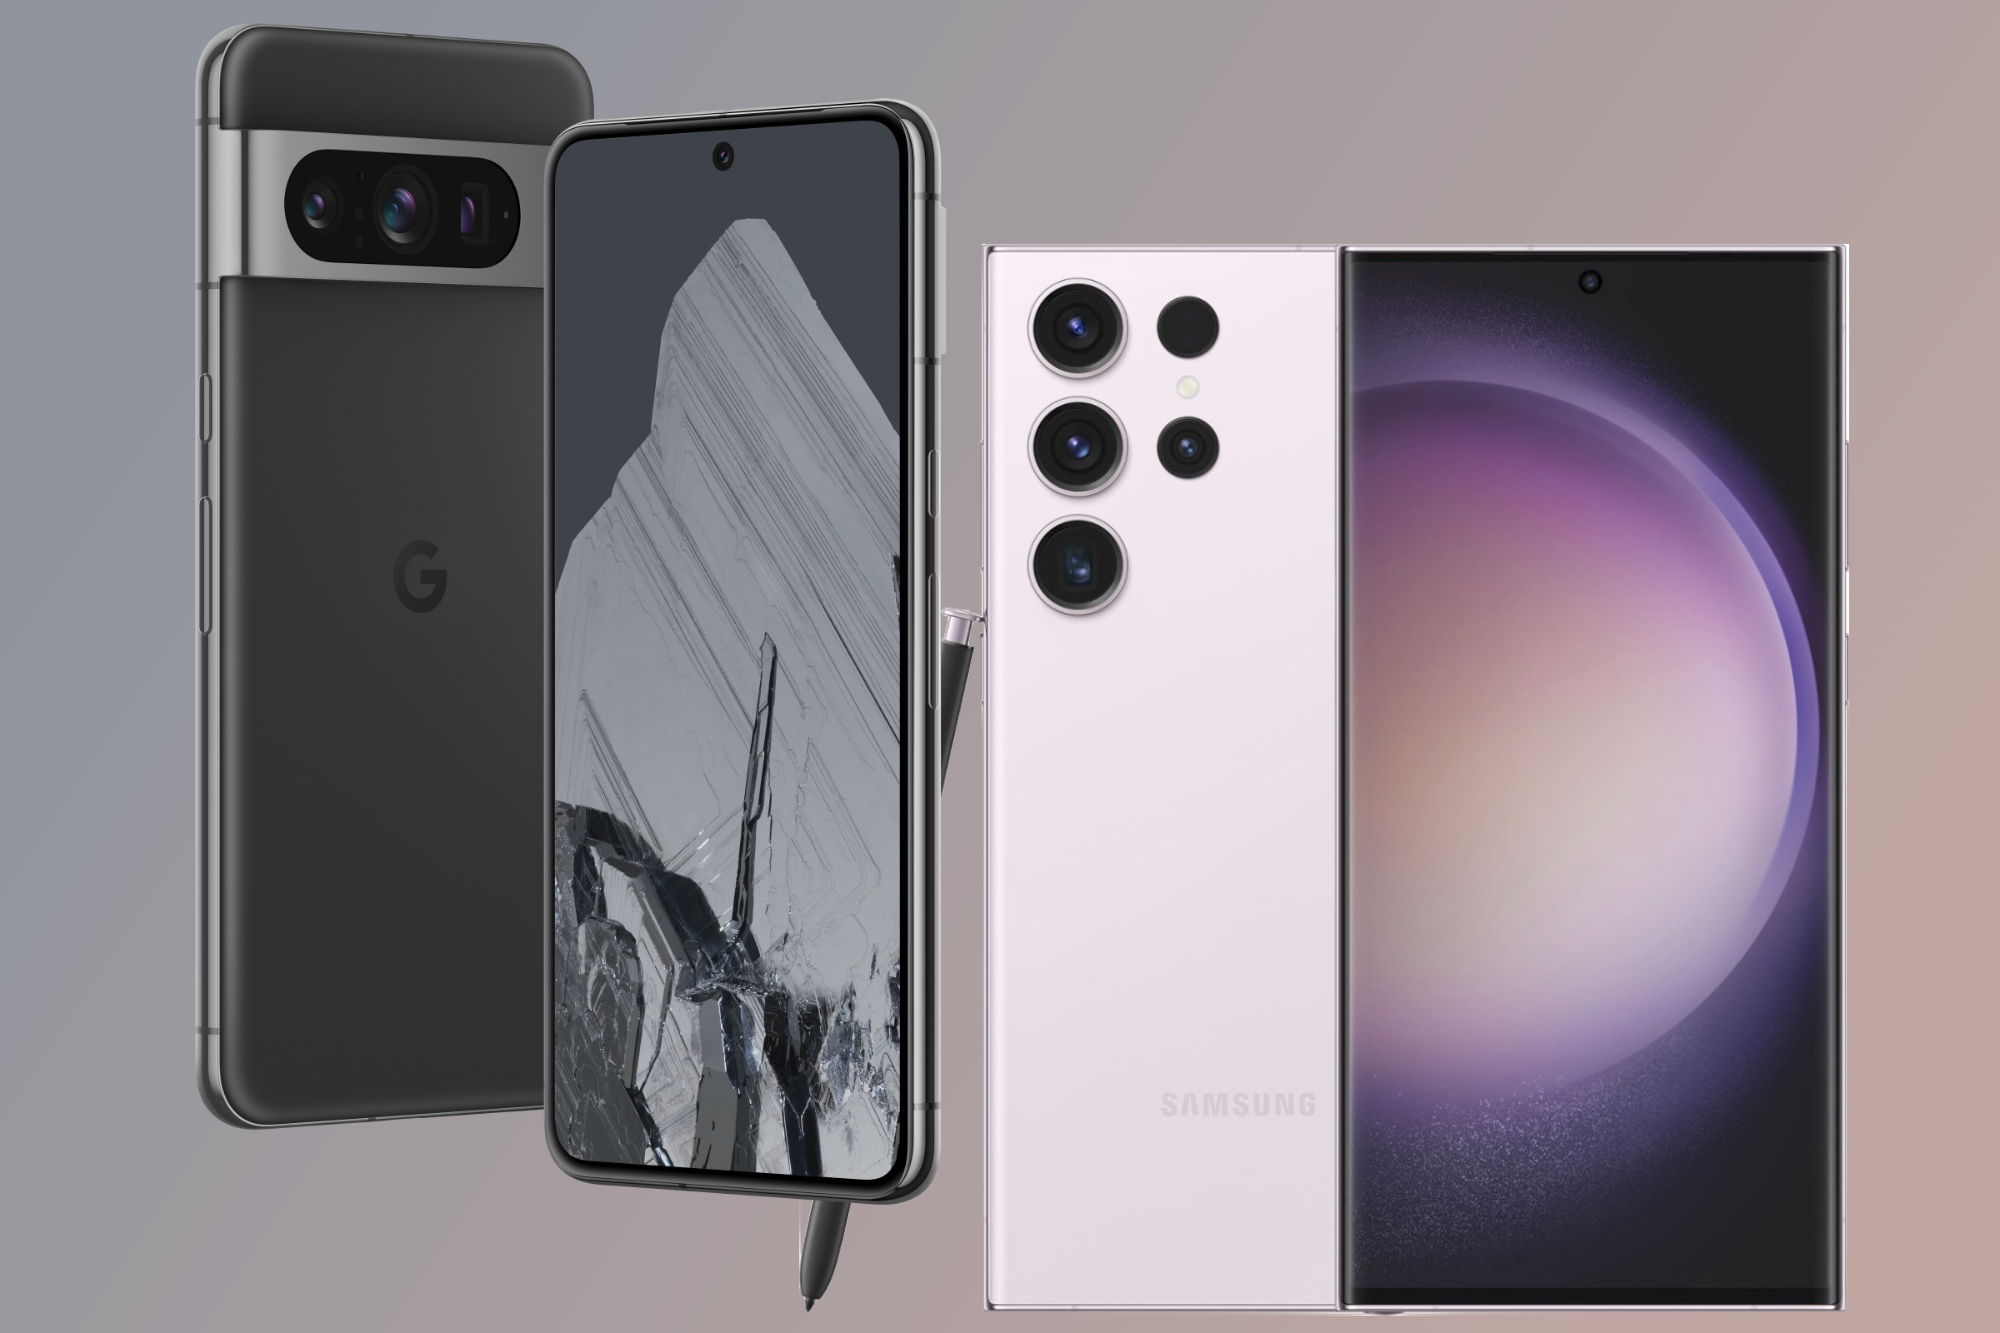 Renders of the Google Pixel 8 Pro and Samsung Galaxy S23 Ultra next to each other.